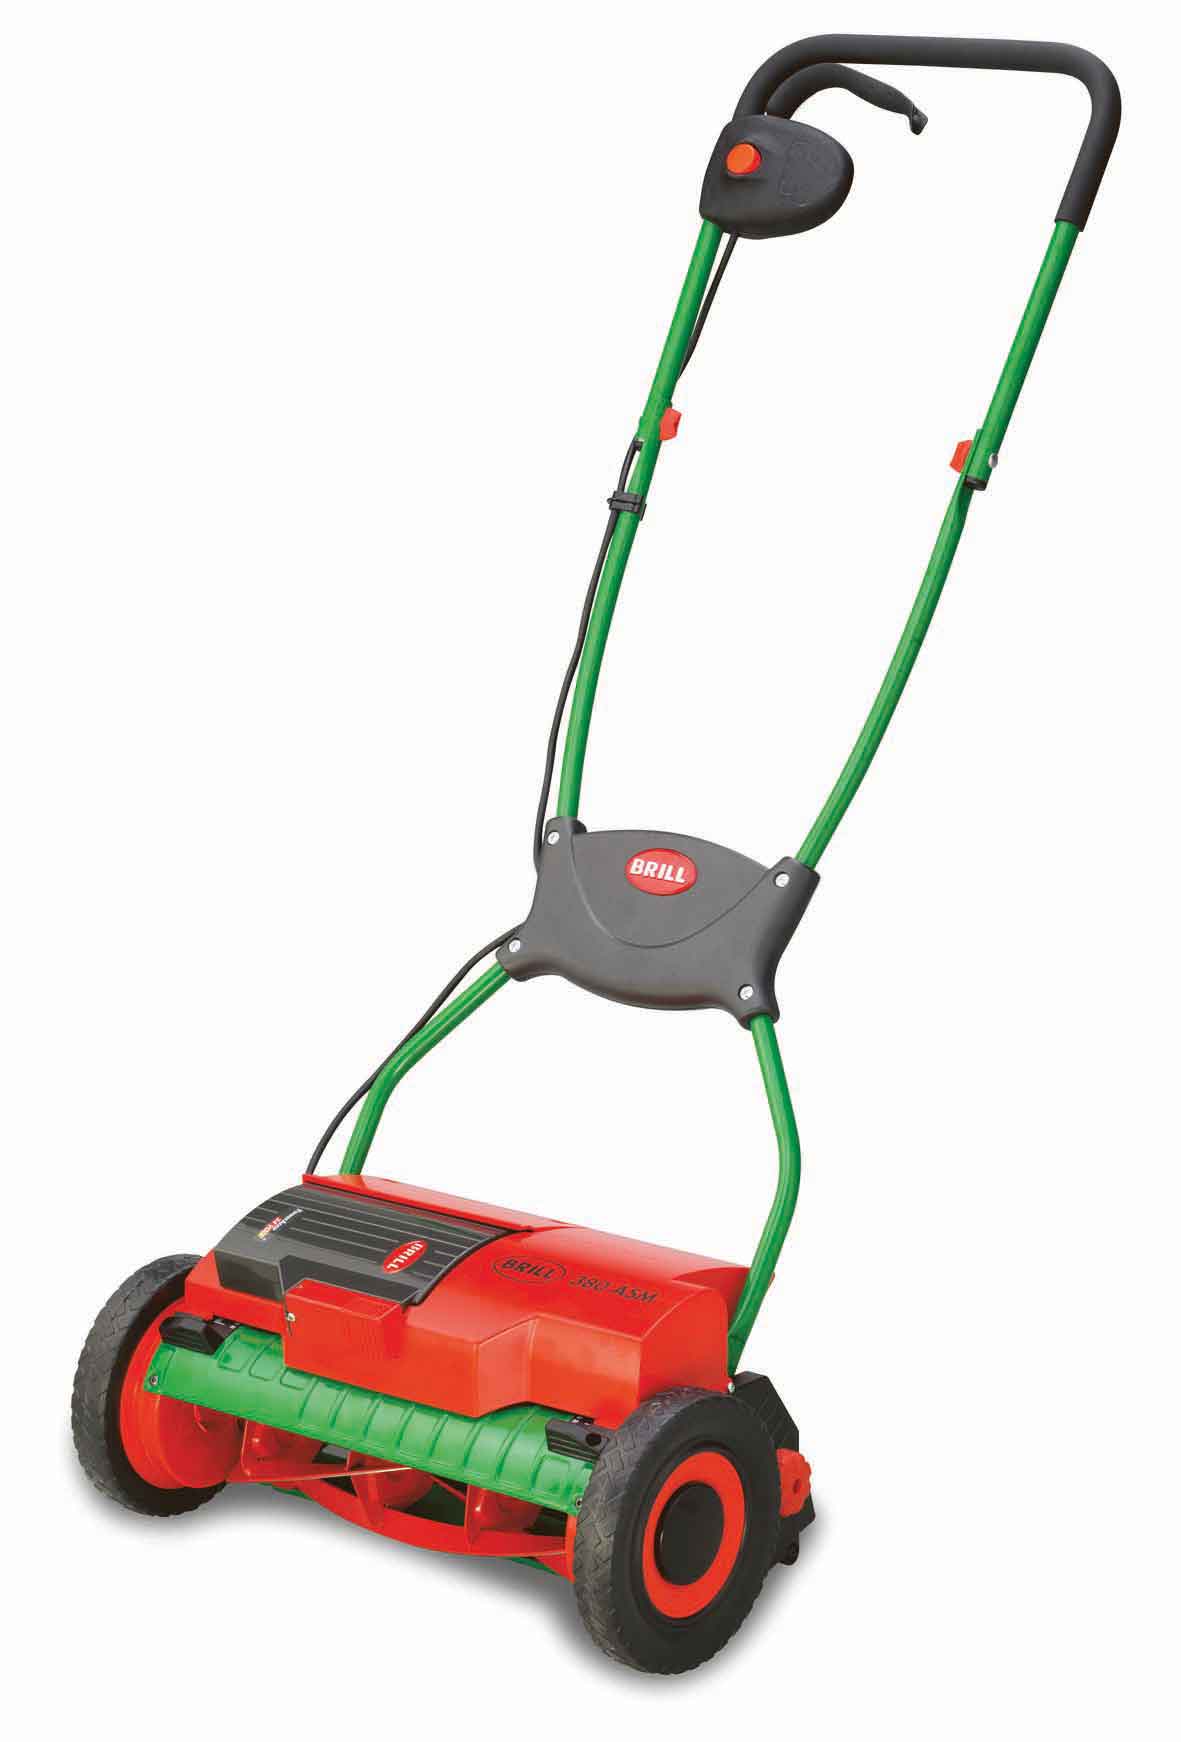 379-ships-free-brill-accu-cordless-electric-lawn-mower-ppm